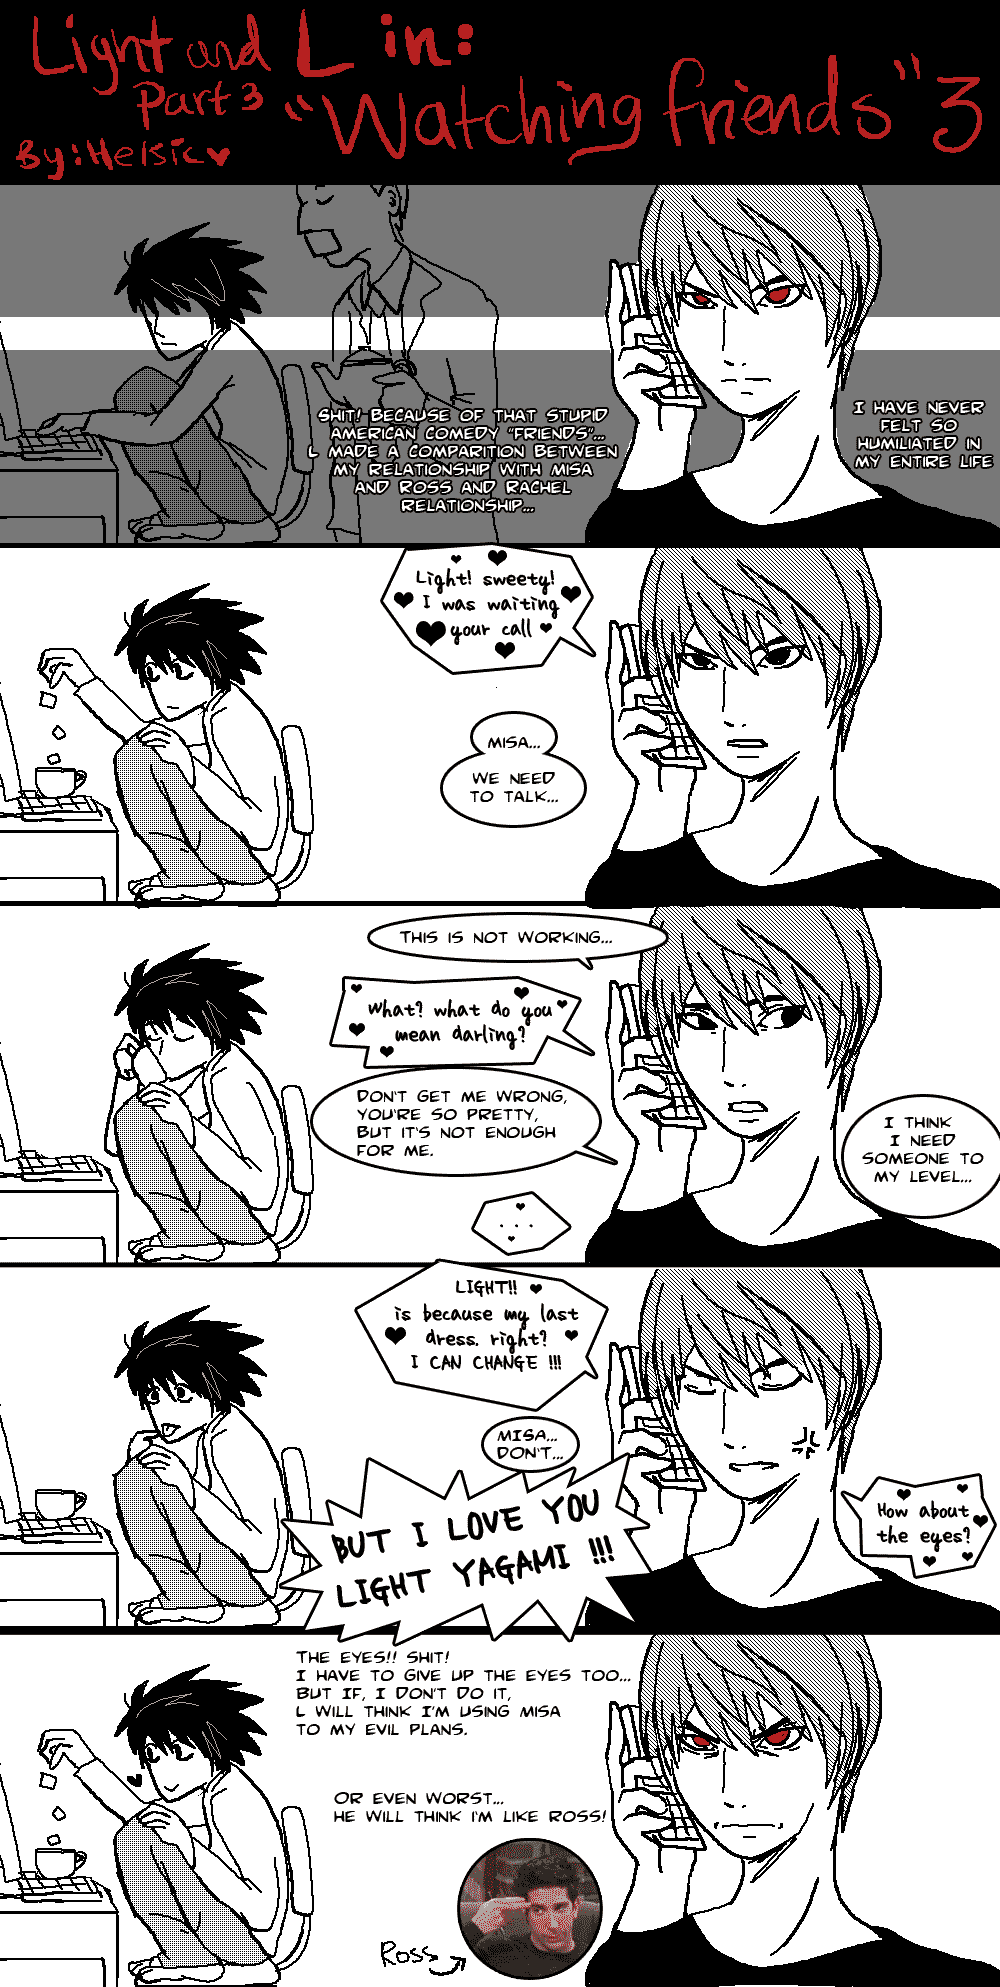 Death Note: Light and L parodies part 3 by helsic